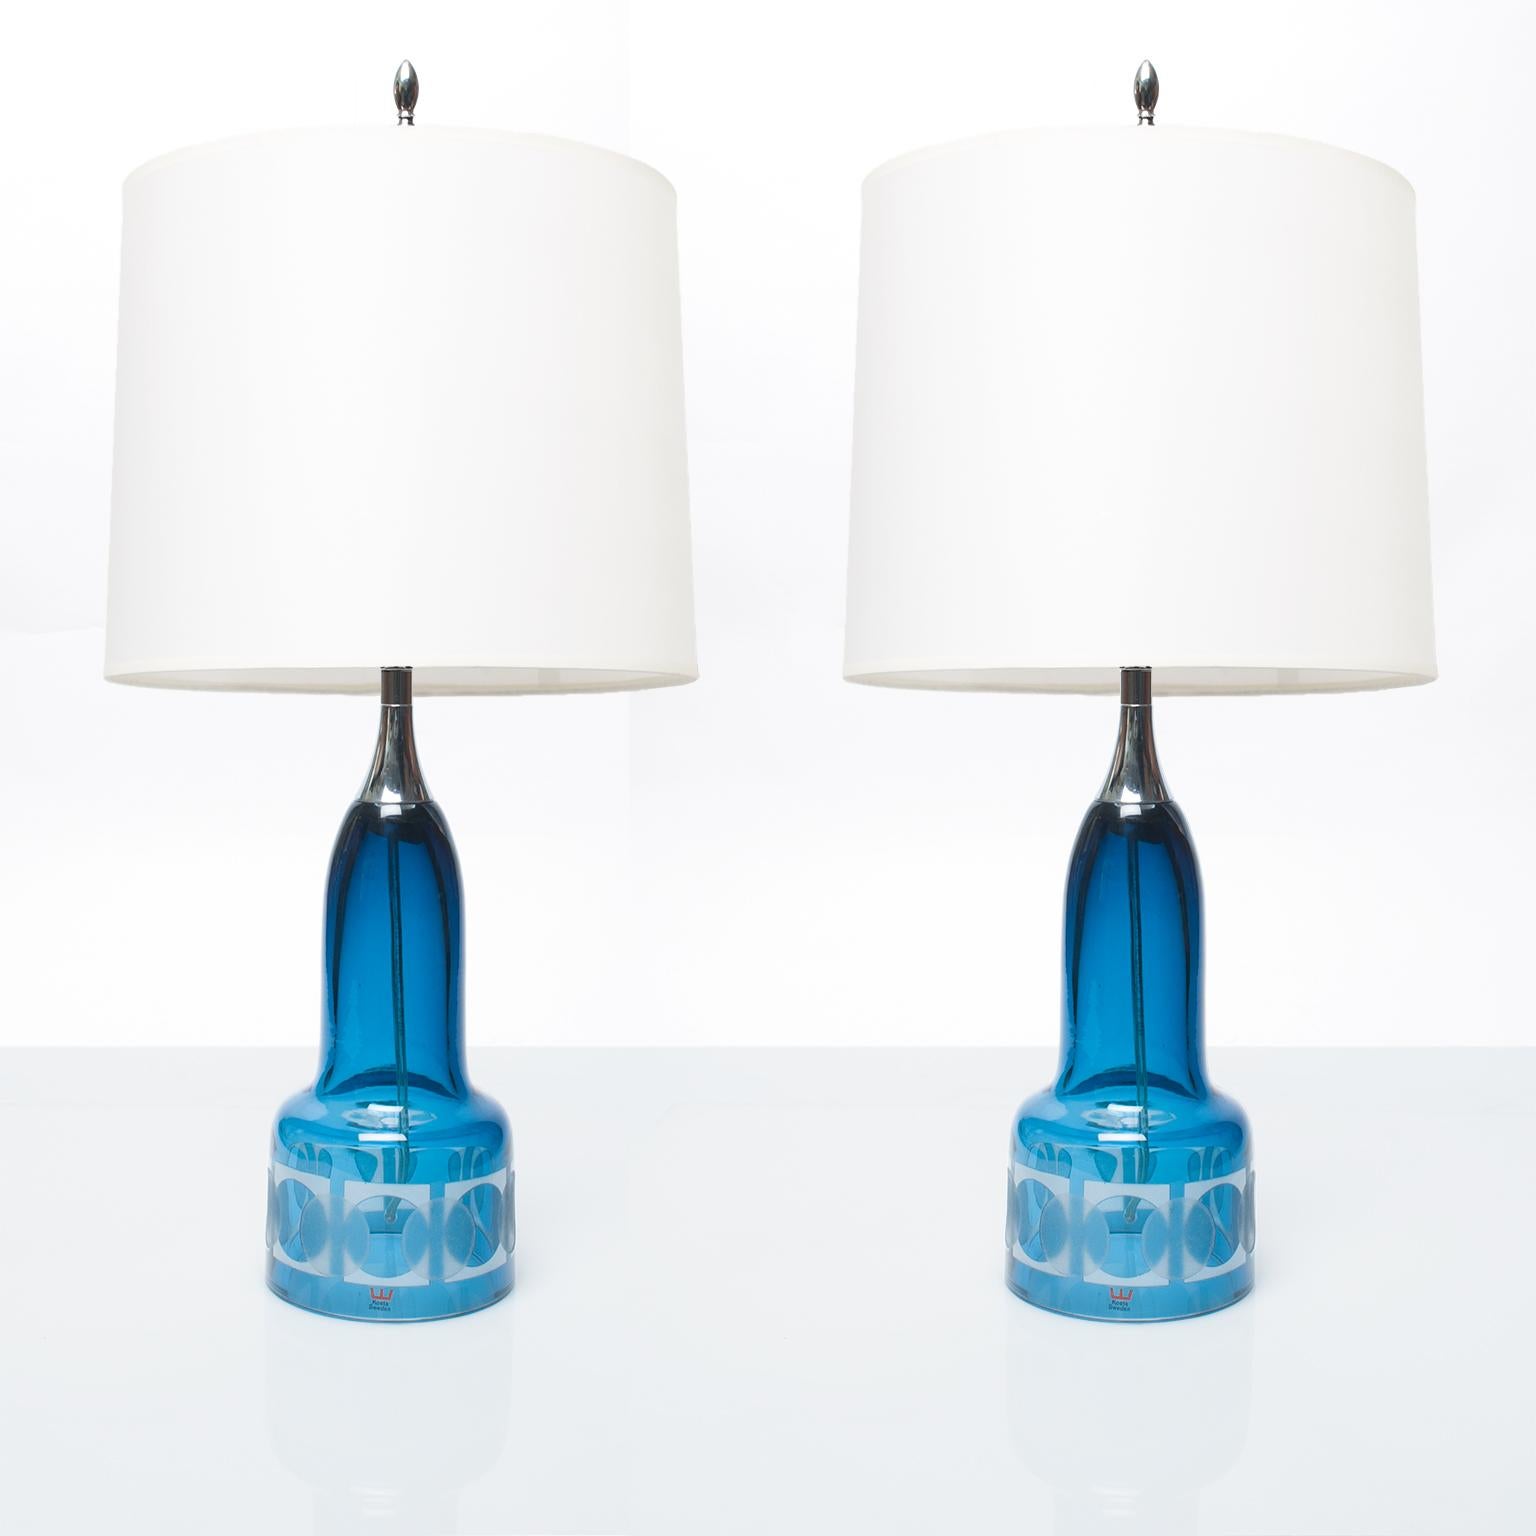 Pair of Scandinavian Modern hand blown, blue etched glass lamps with nickel plated hardware. Newly rewired for use in the USA with a single 3-way socket and cord switch. Designed by Owe Sandeberg for Kosta, Sweden circa 1960.
Shade not